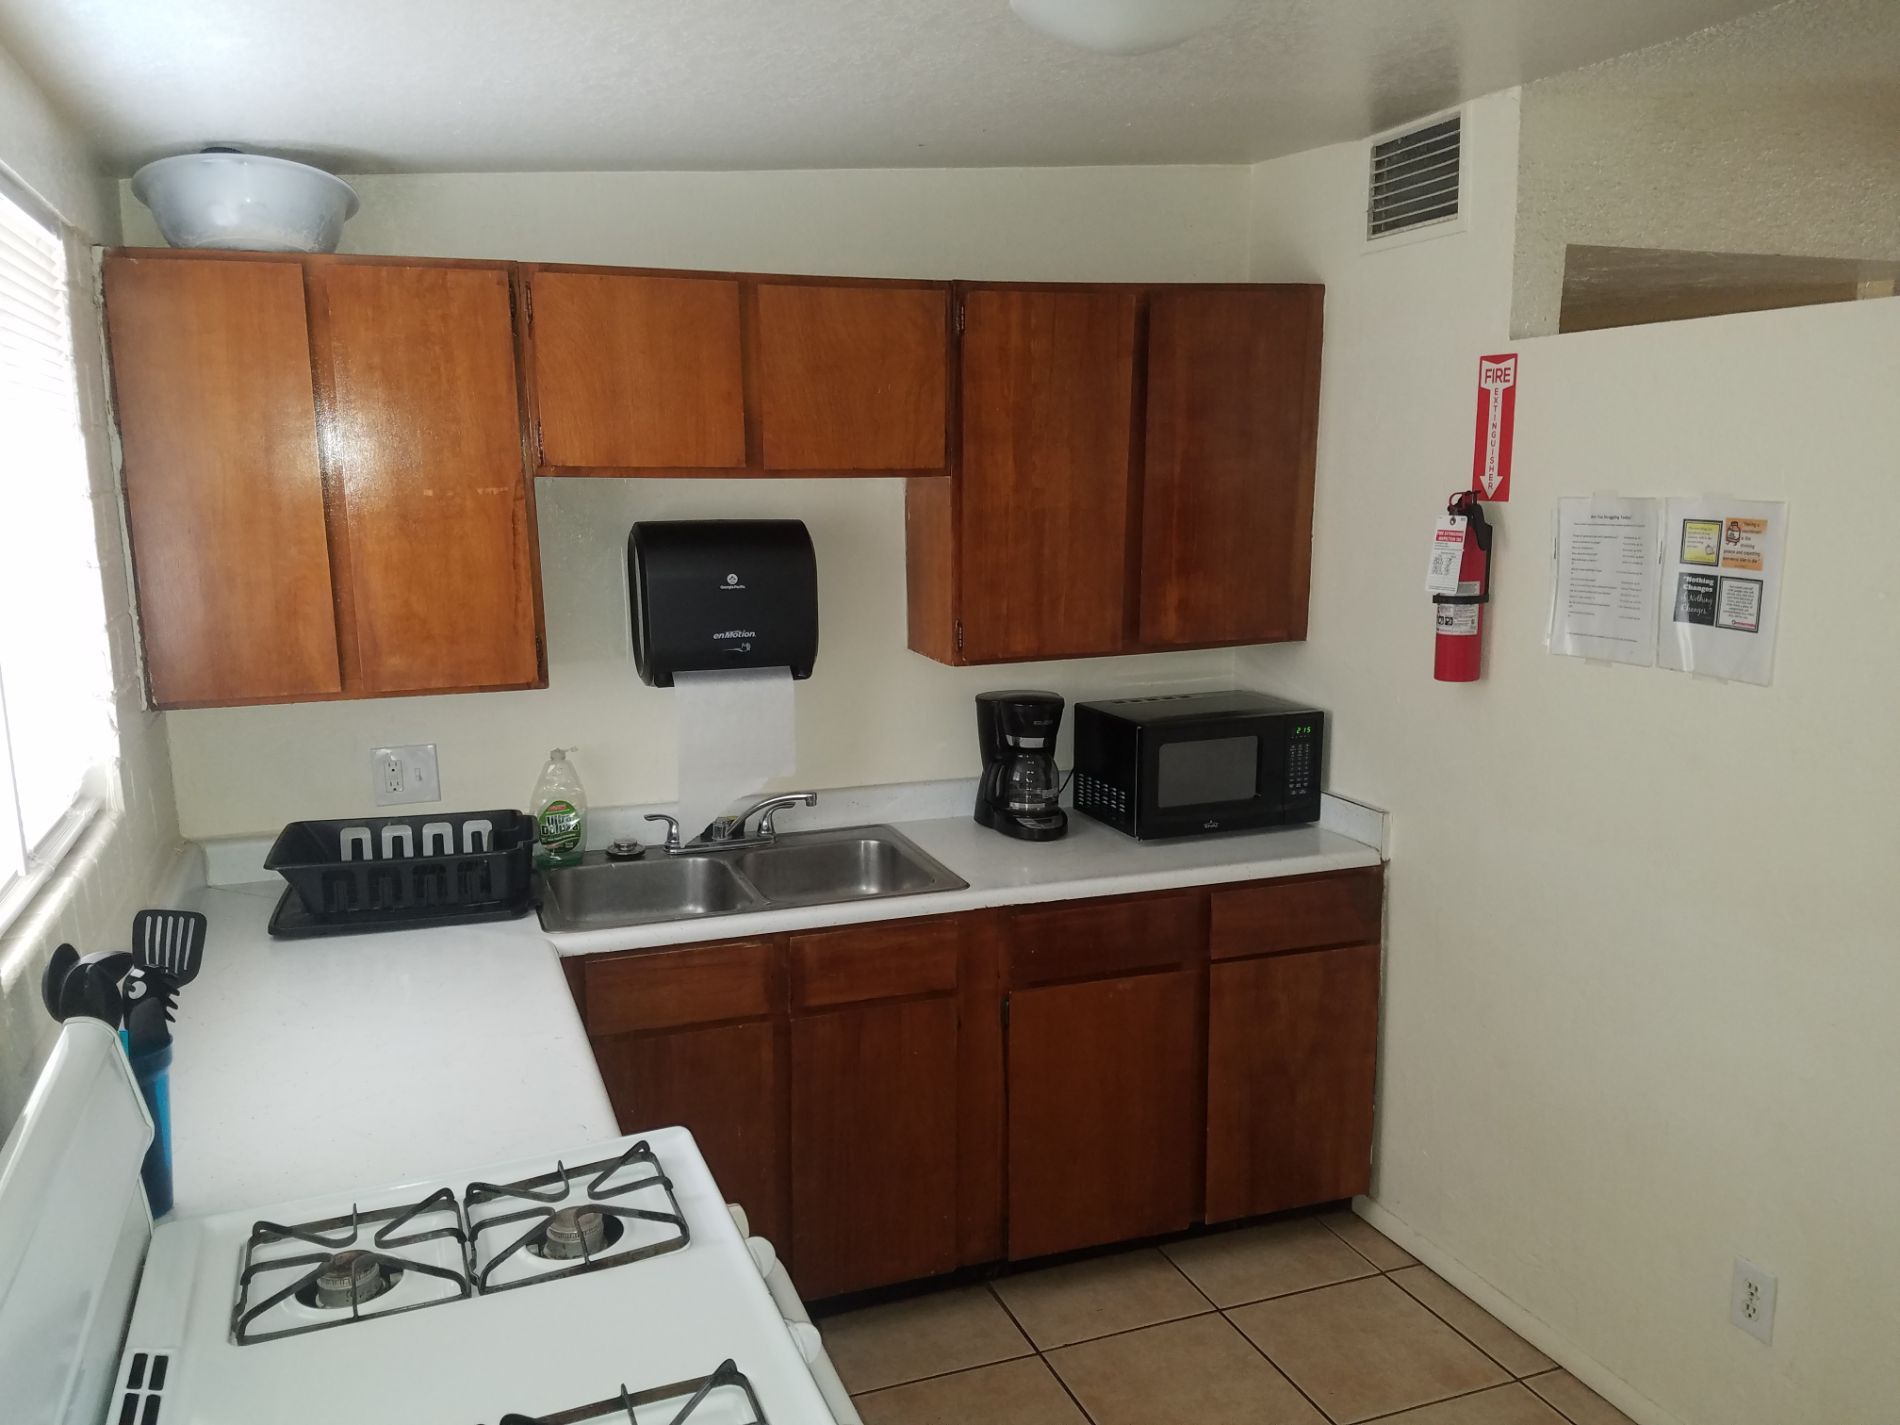 Kitchen with dated appliances (stove, sink, microwave) and brown cabinets, ready for a modern remodel in (Tucson AZ)